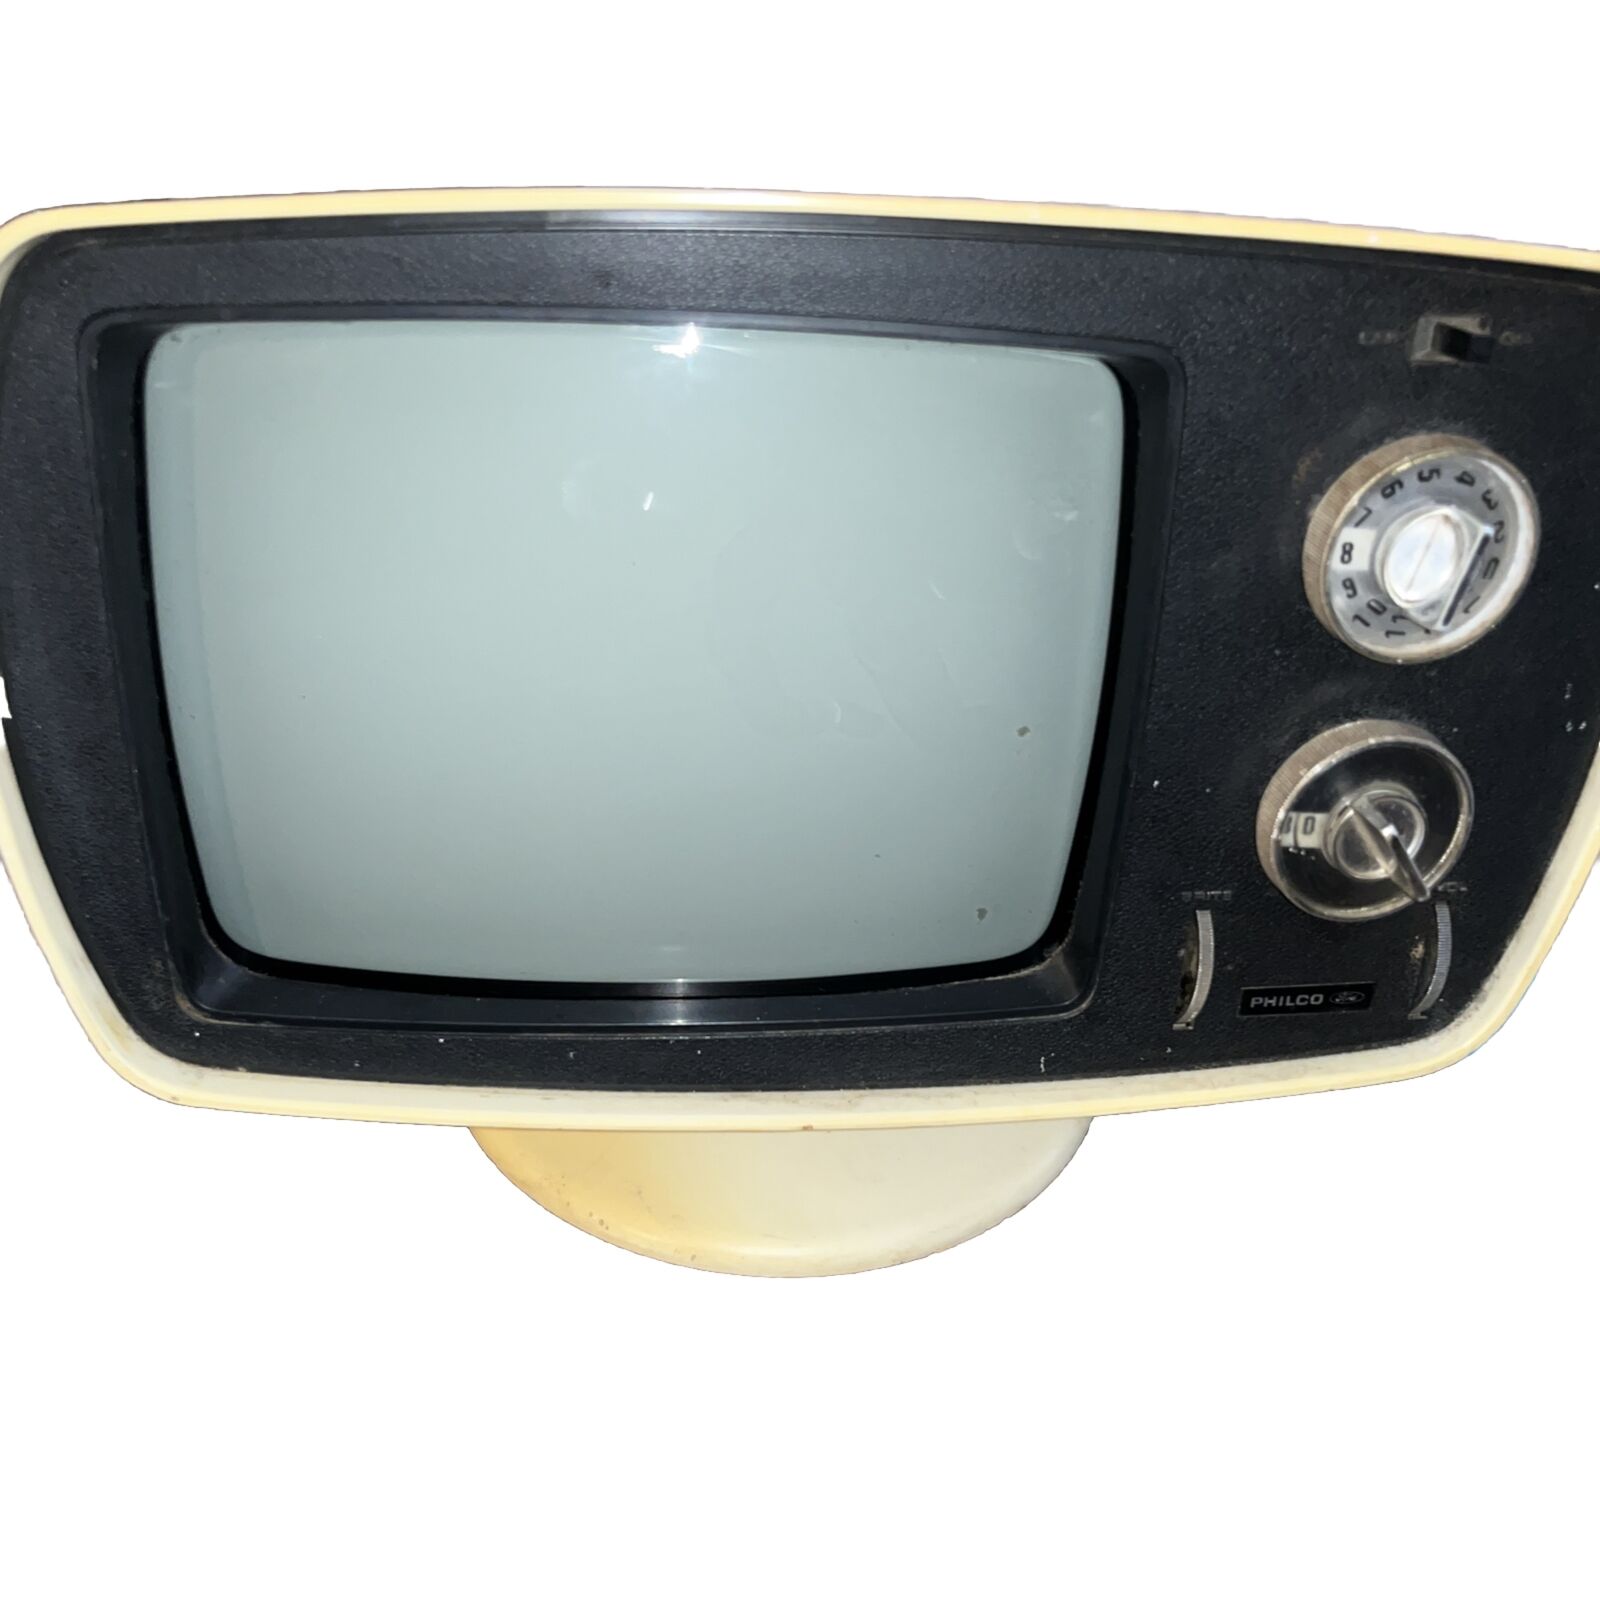 Vintage Cream  1970s PHILCO Ford ATOMIC TV Television SPACE AGE Tested MCM B370